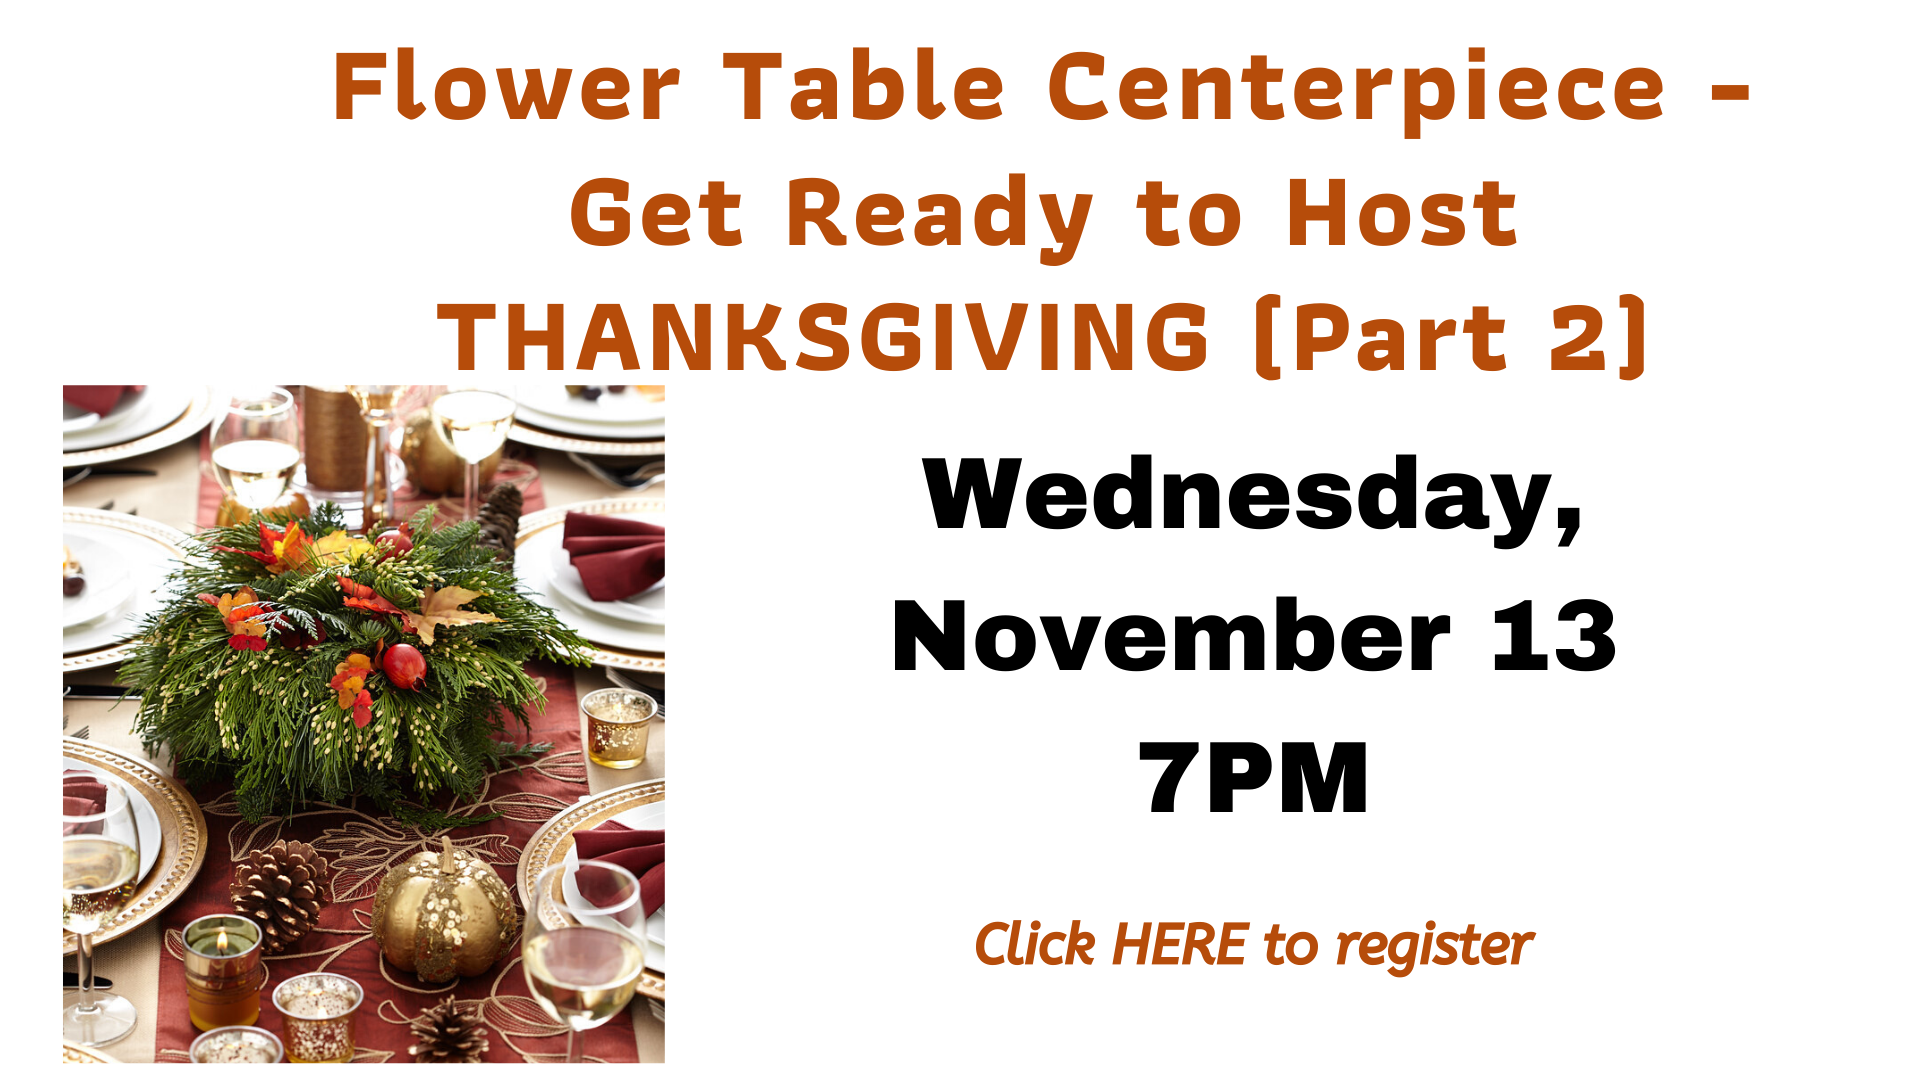 CAROUSEL Table Centerpiece for Thanksgiving 11.13.19.png